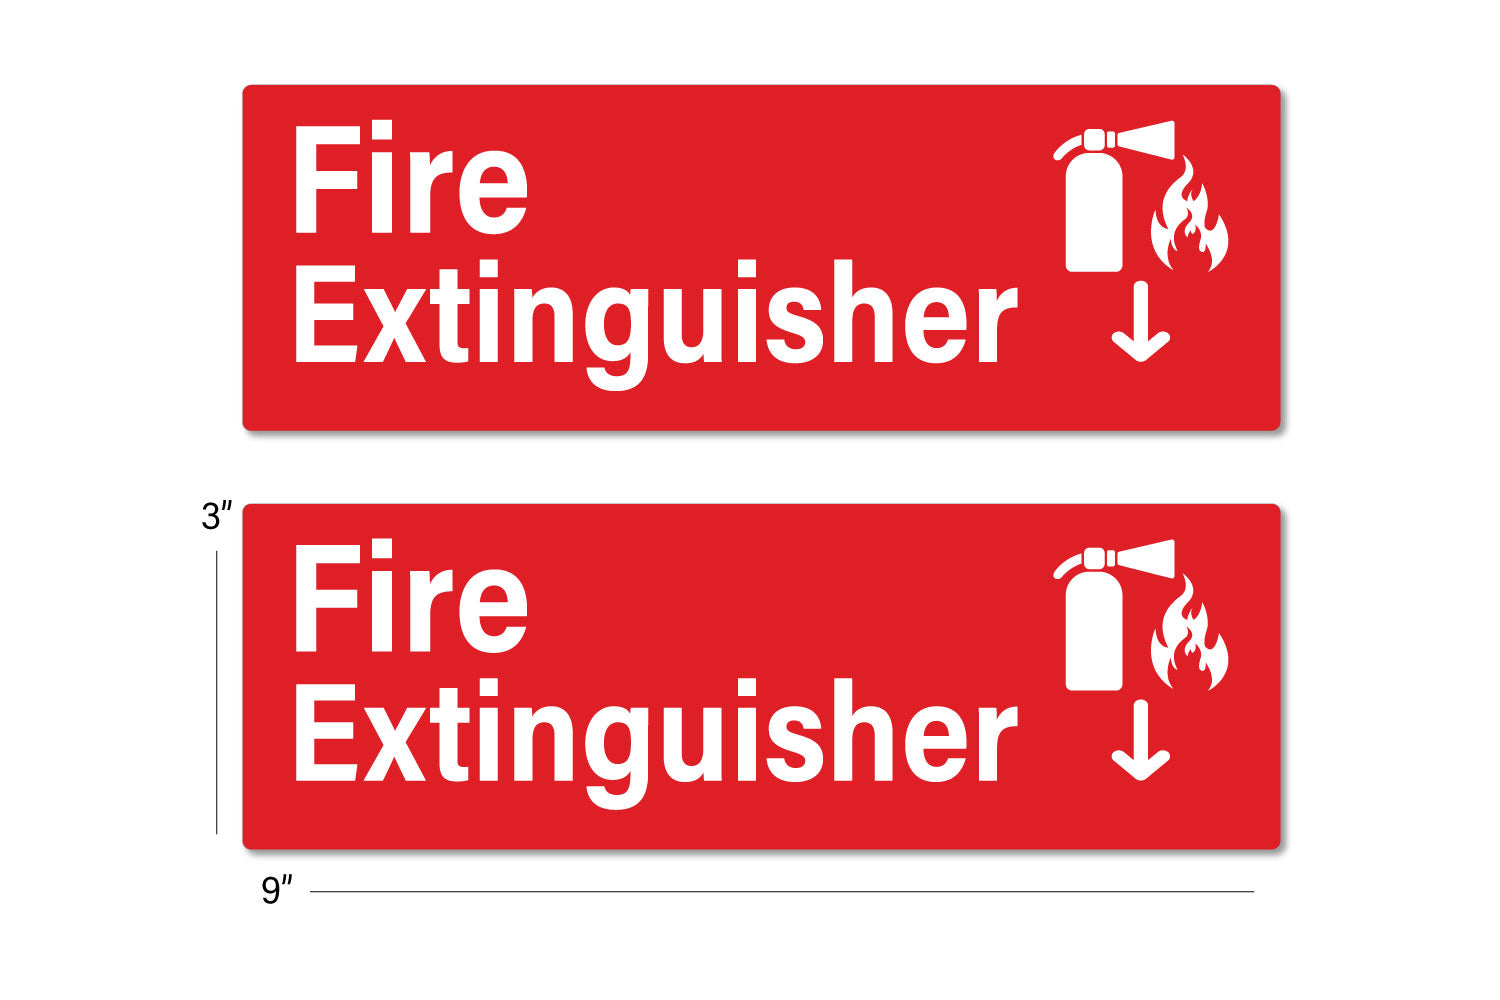 Engraved fire extinguisher signs w/ arrow.